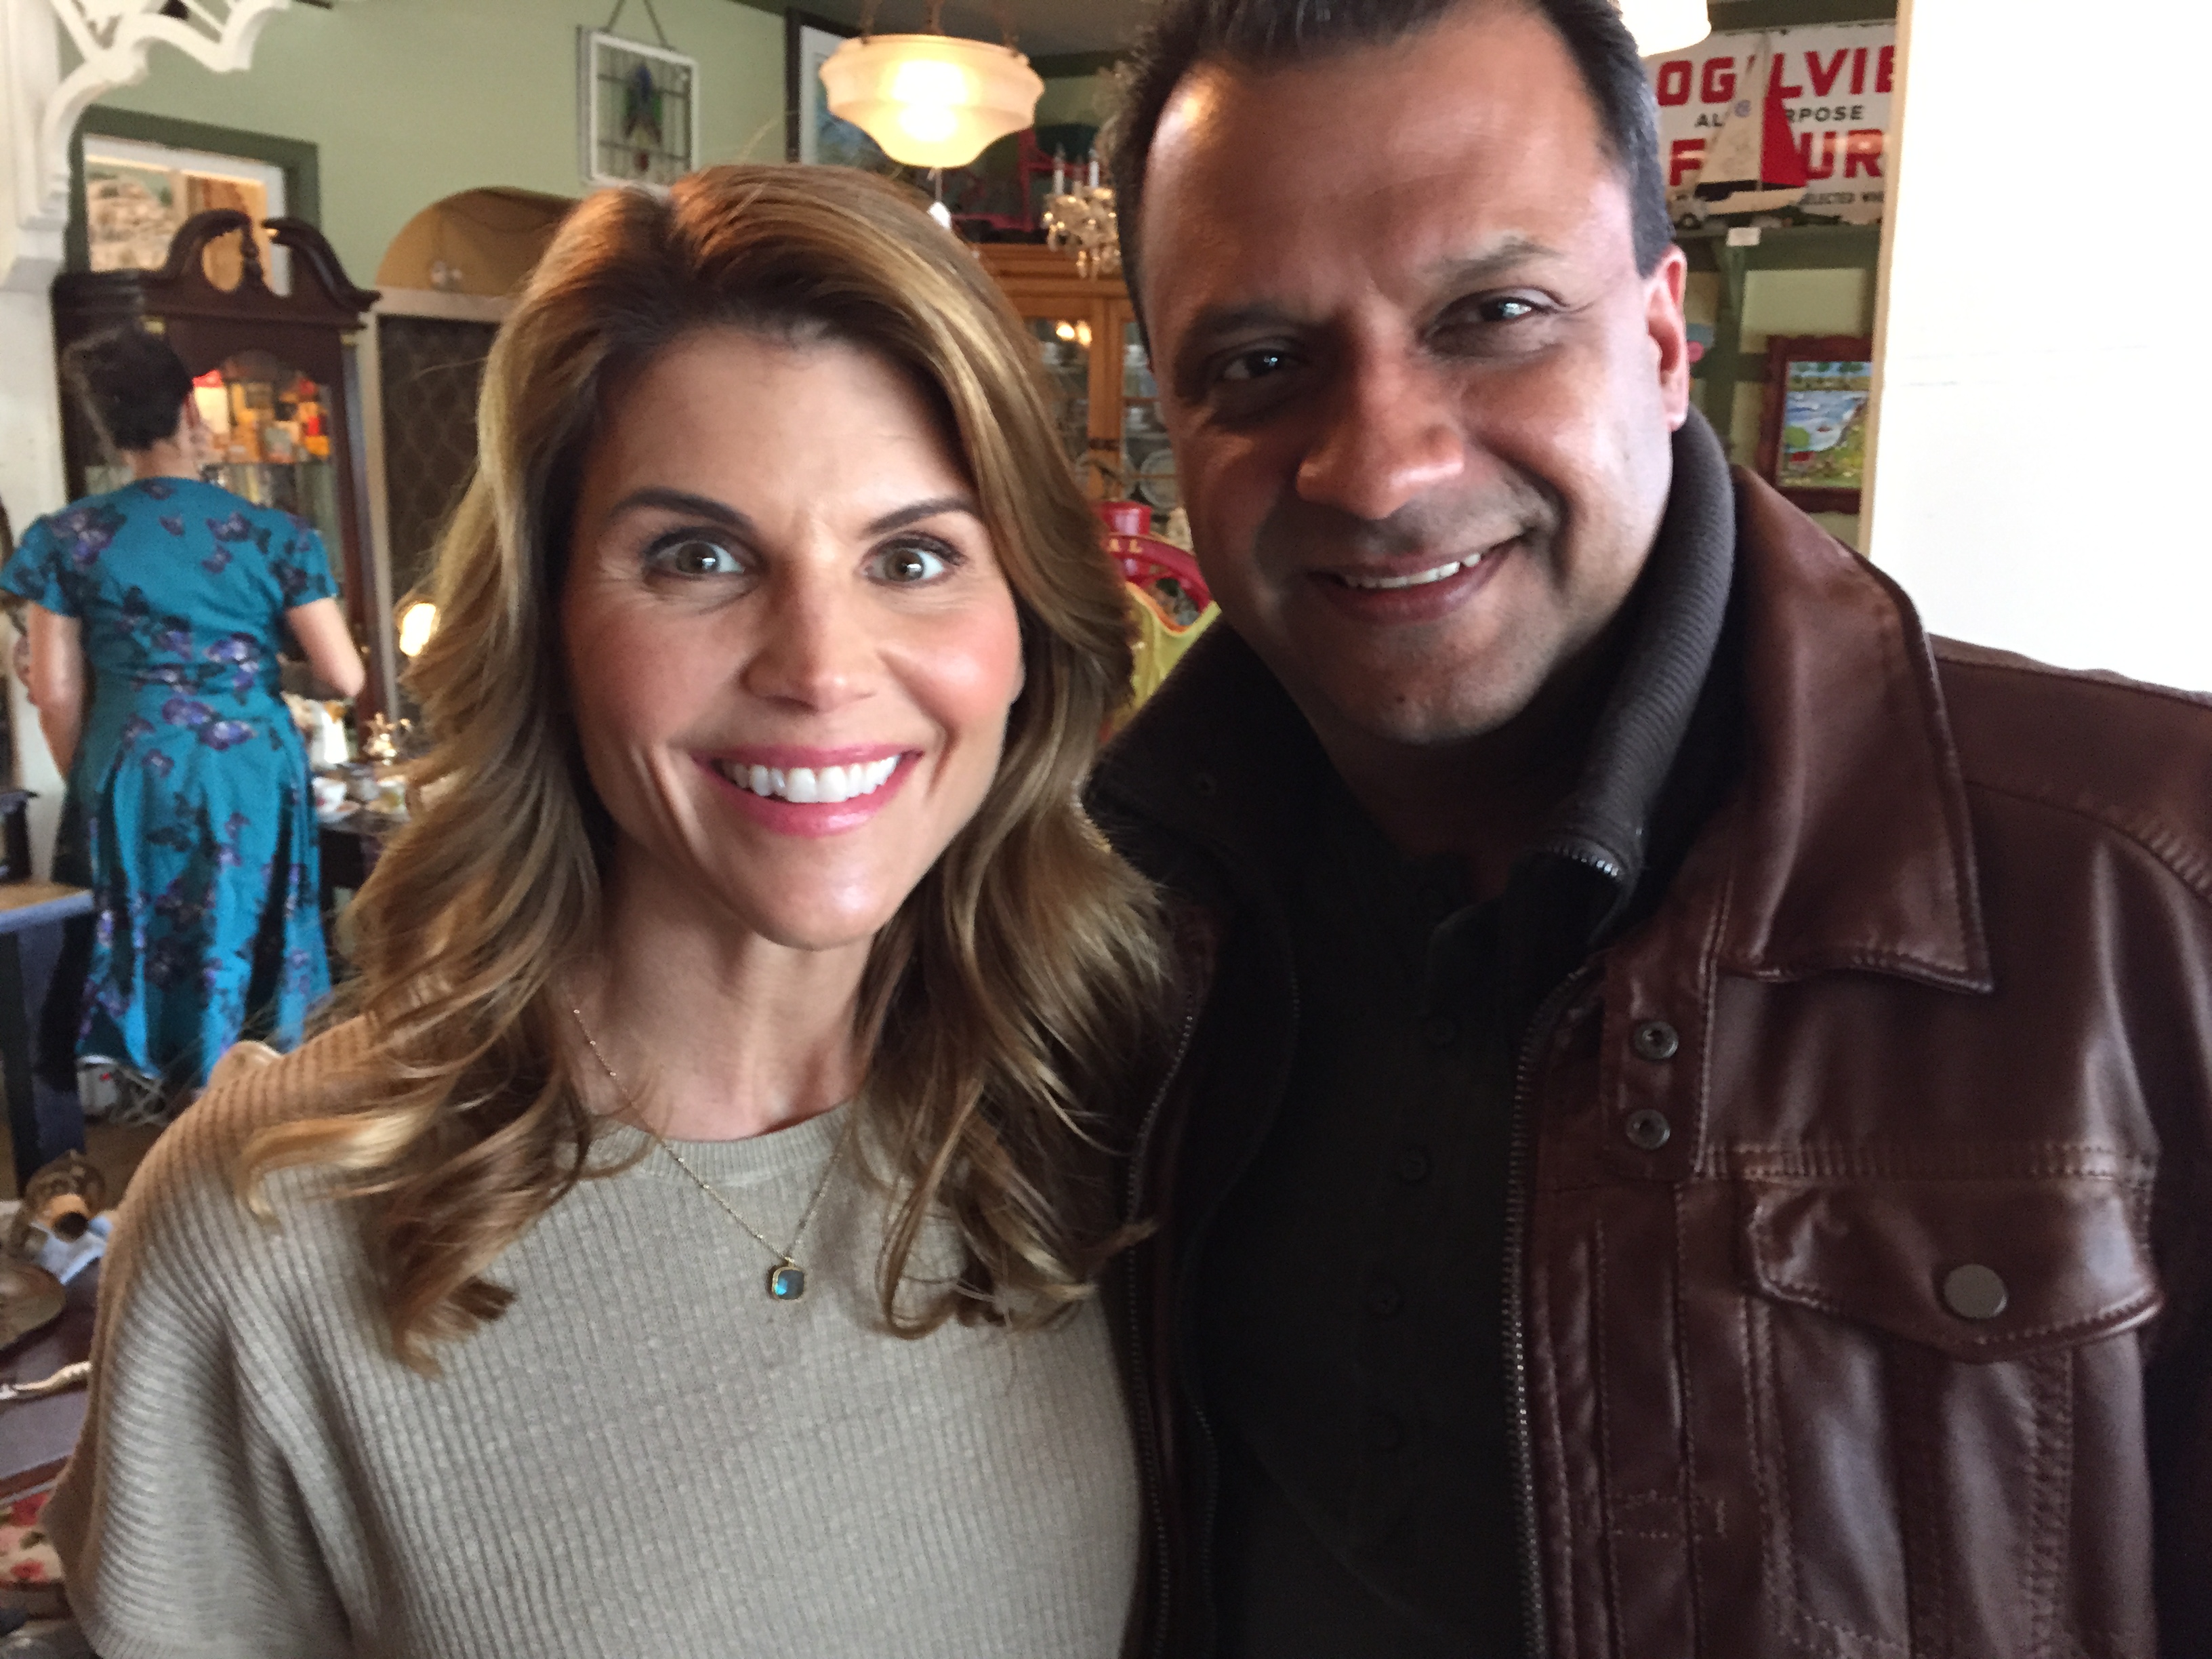 As Keith Patel in Garage Sale Mystery: The Wedding Dress, with Lori Loughlin